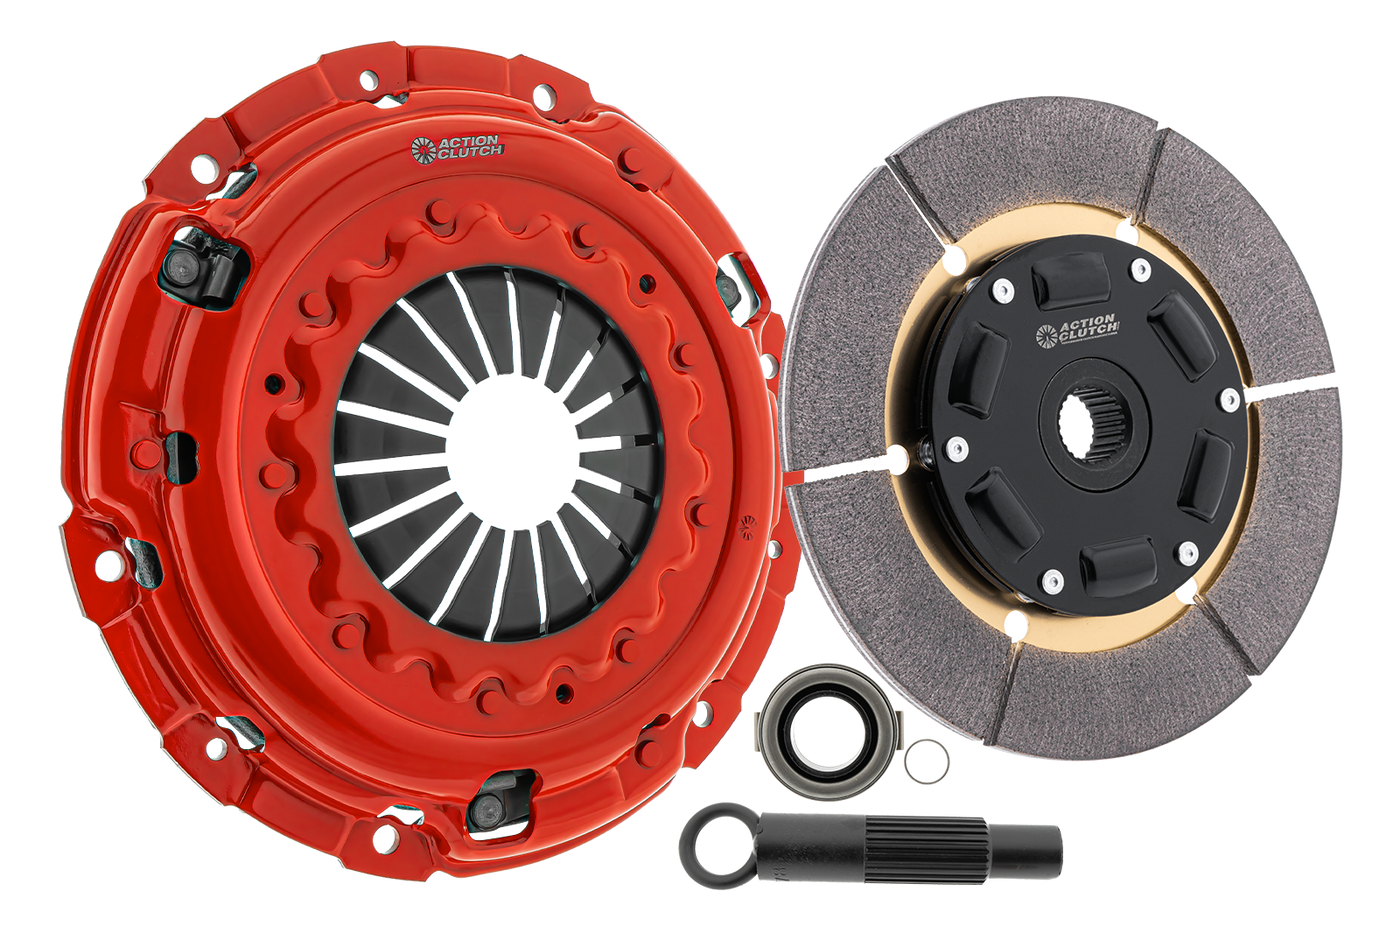 Ironman Sprung (Street) Clutch Kit for Mitsubishi Eclipse 1990-1994 2.0L (4G63) Non-Turbo 2WD